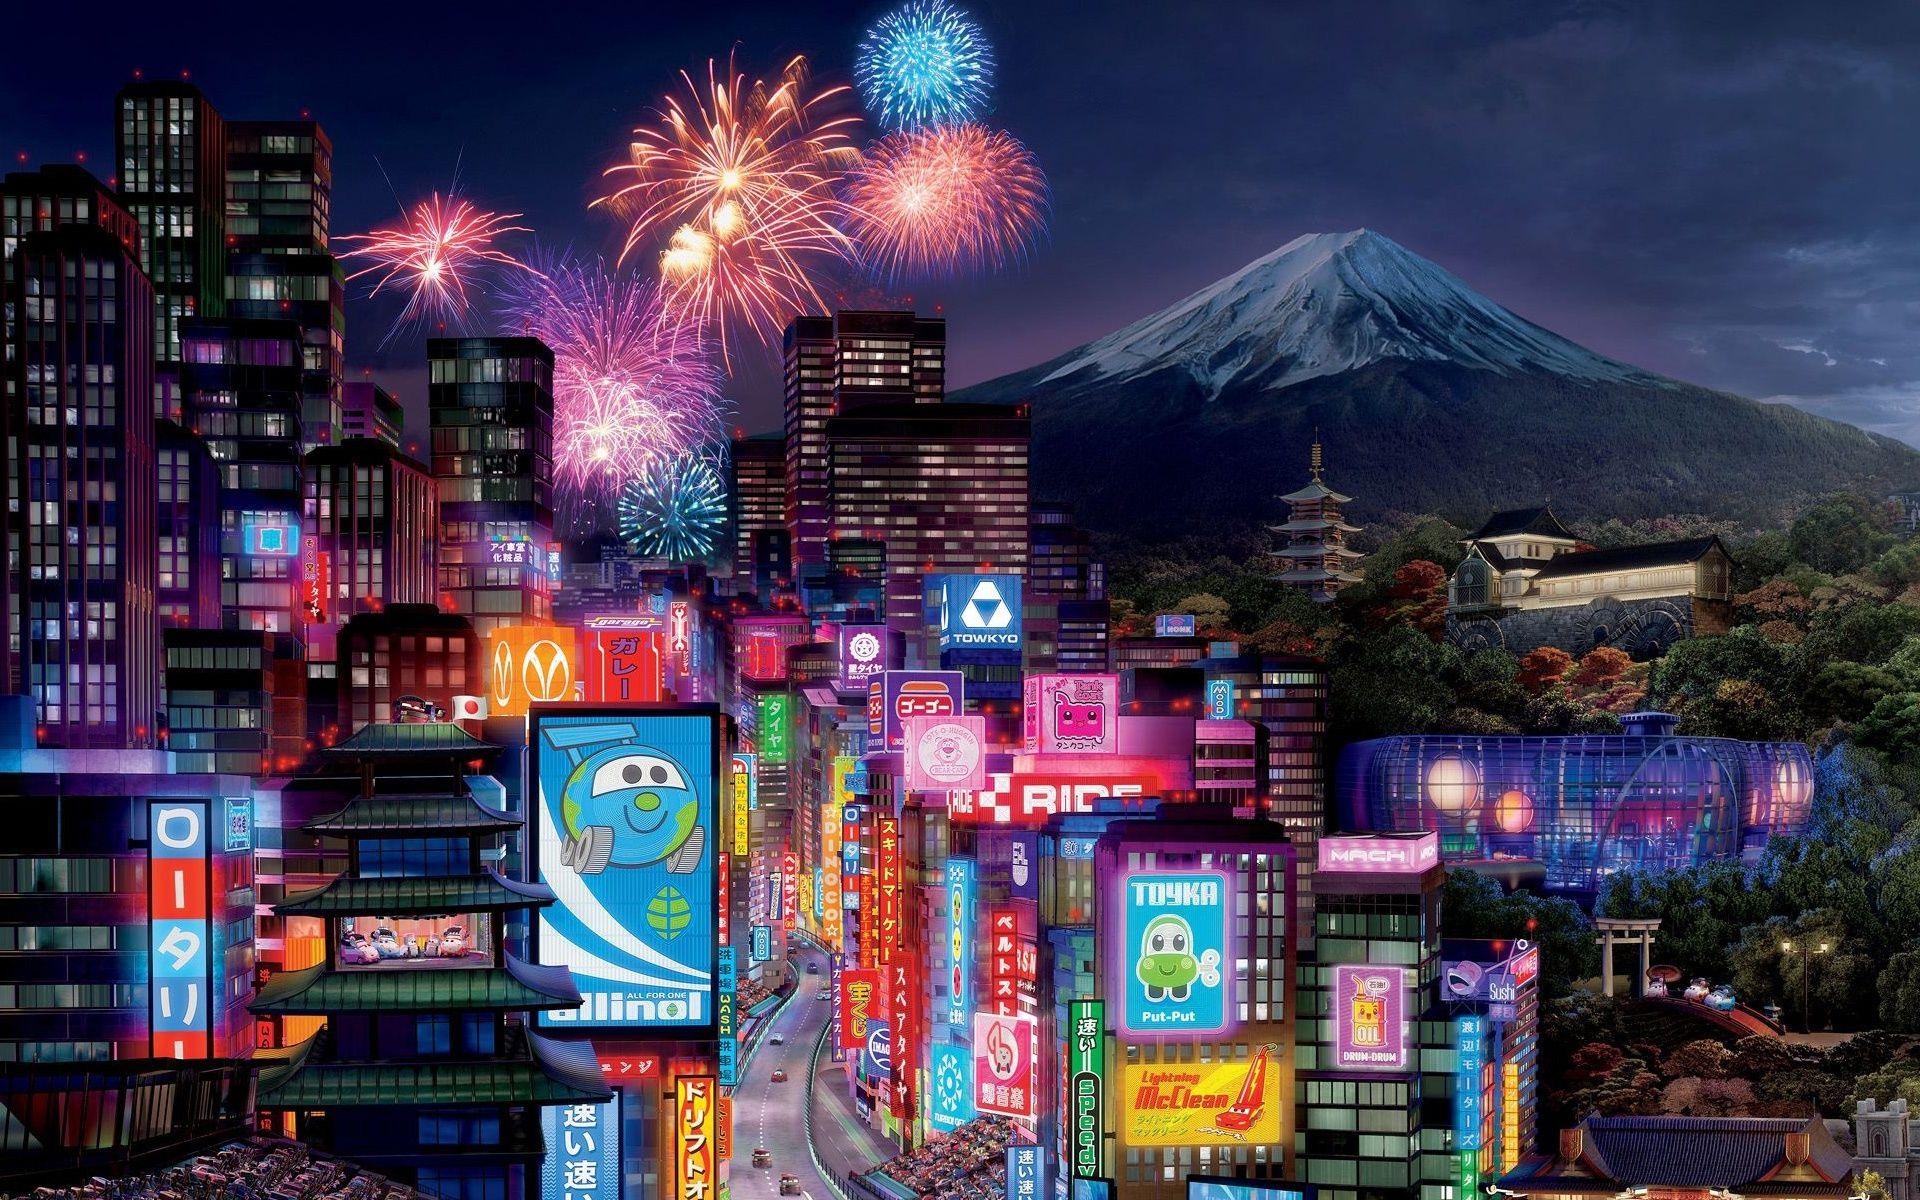 Tokyo City in Cars 2 Wallpaper in jpg format for free download